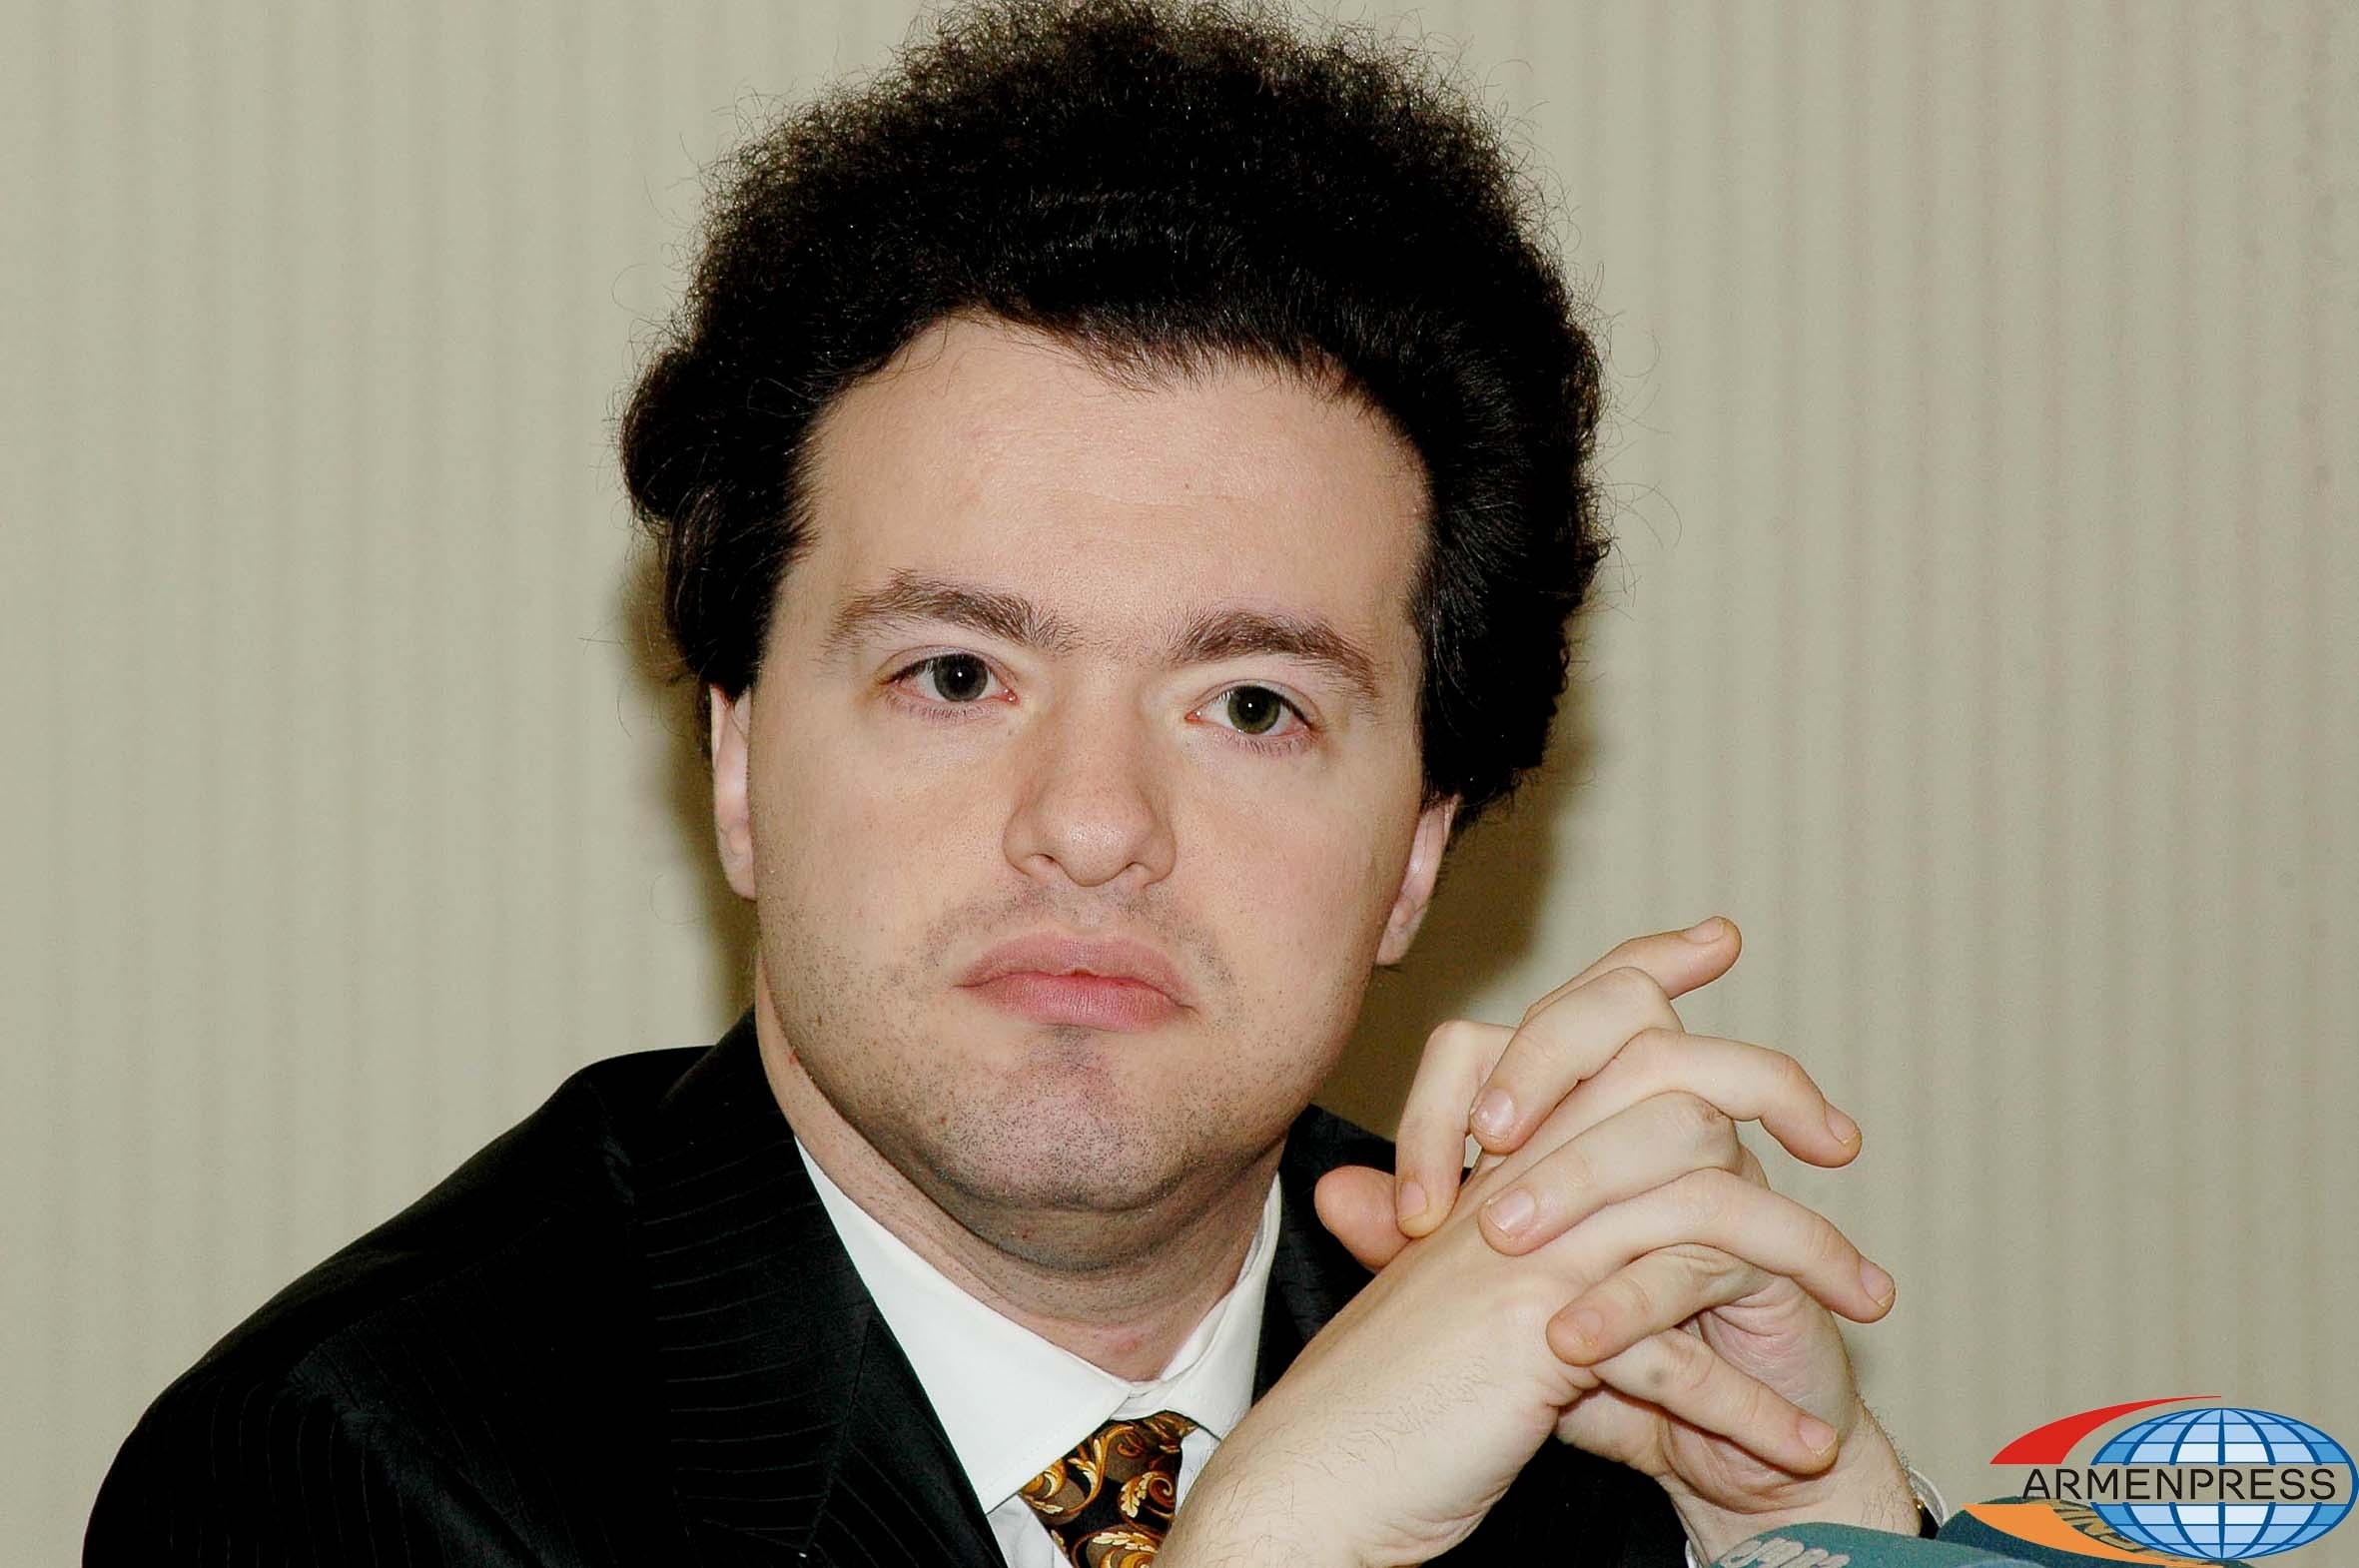 Evgeny Kissin promises to contribute to international recognition of the Armenian Genocide
